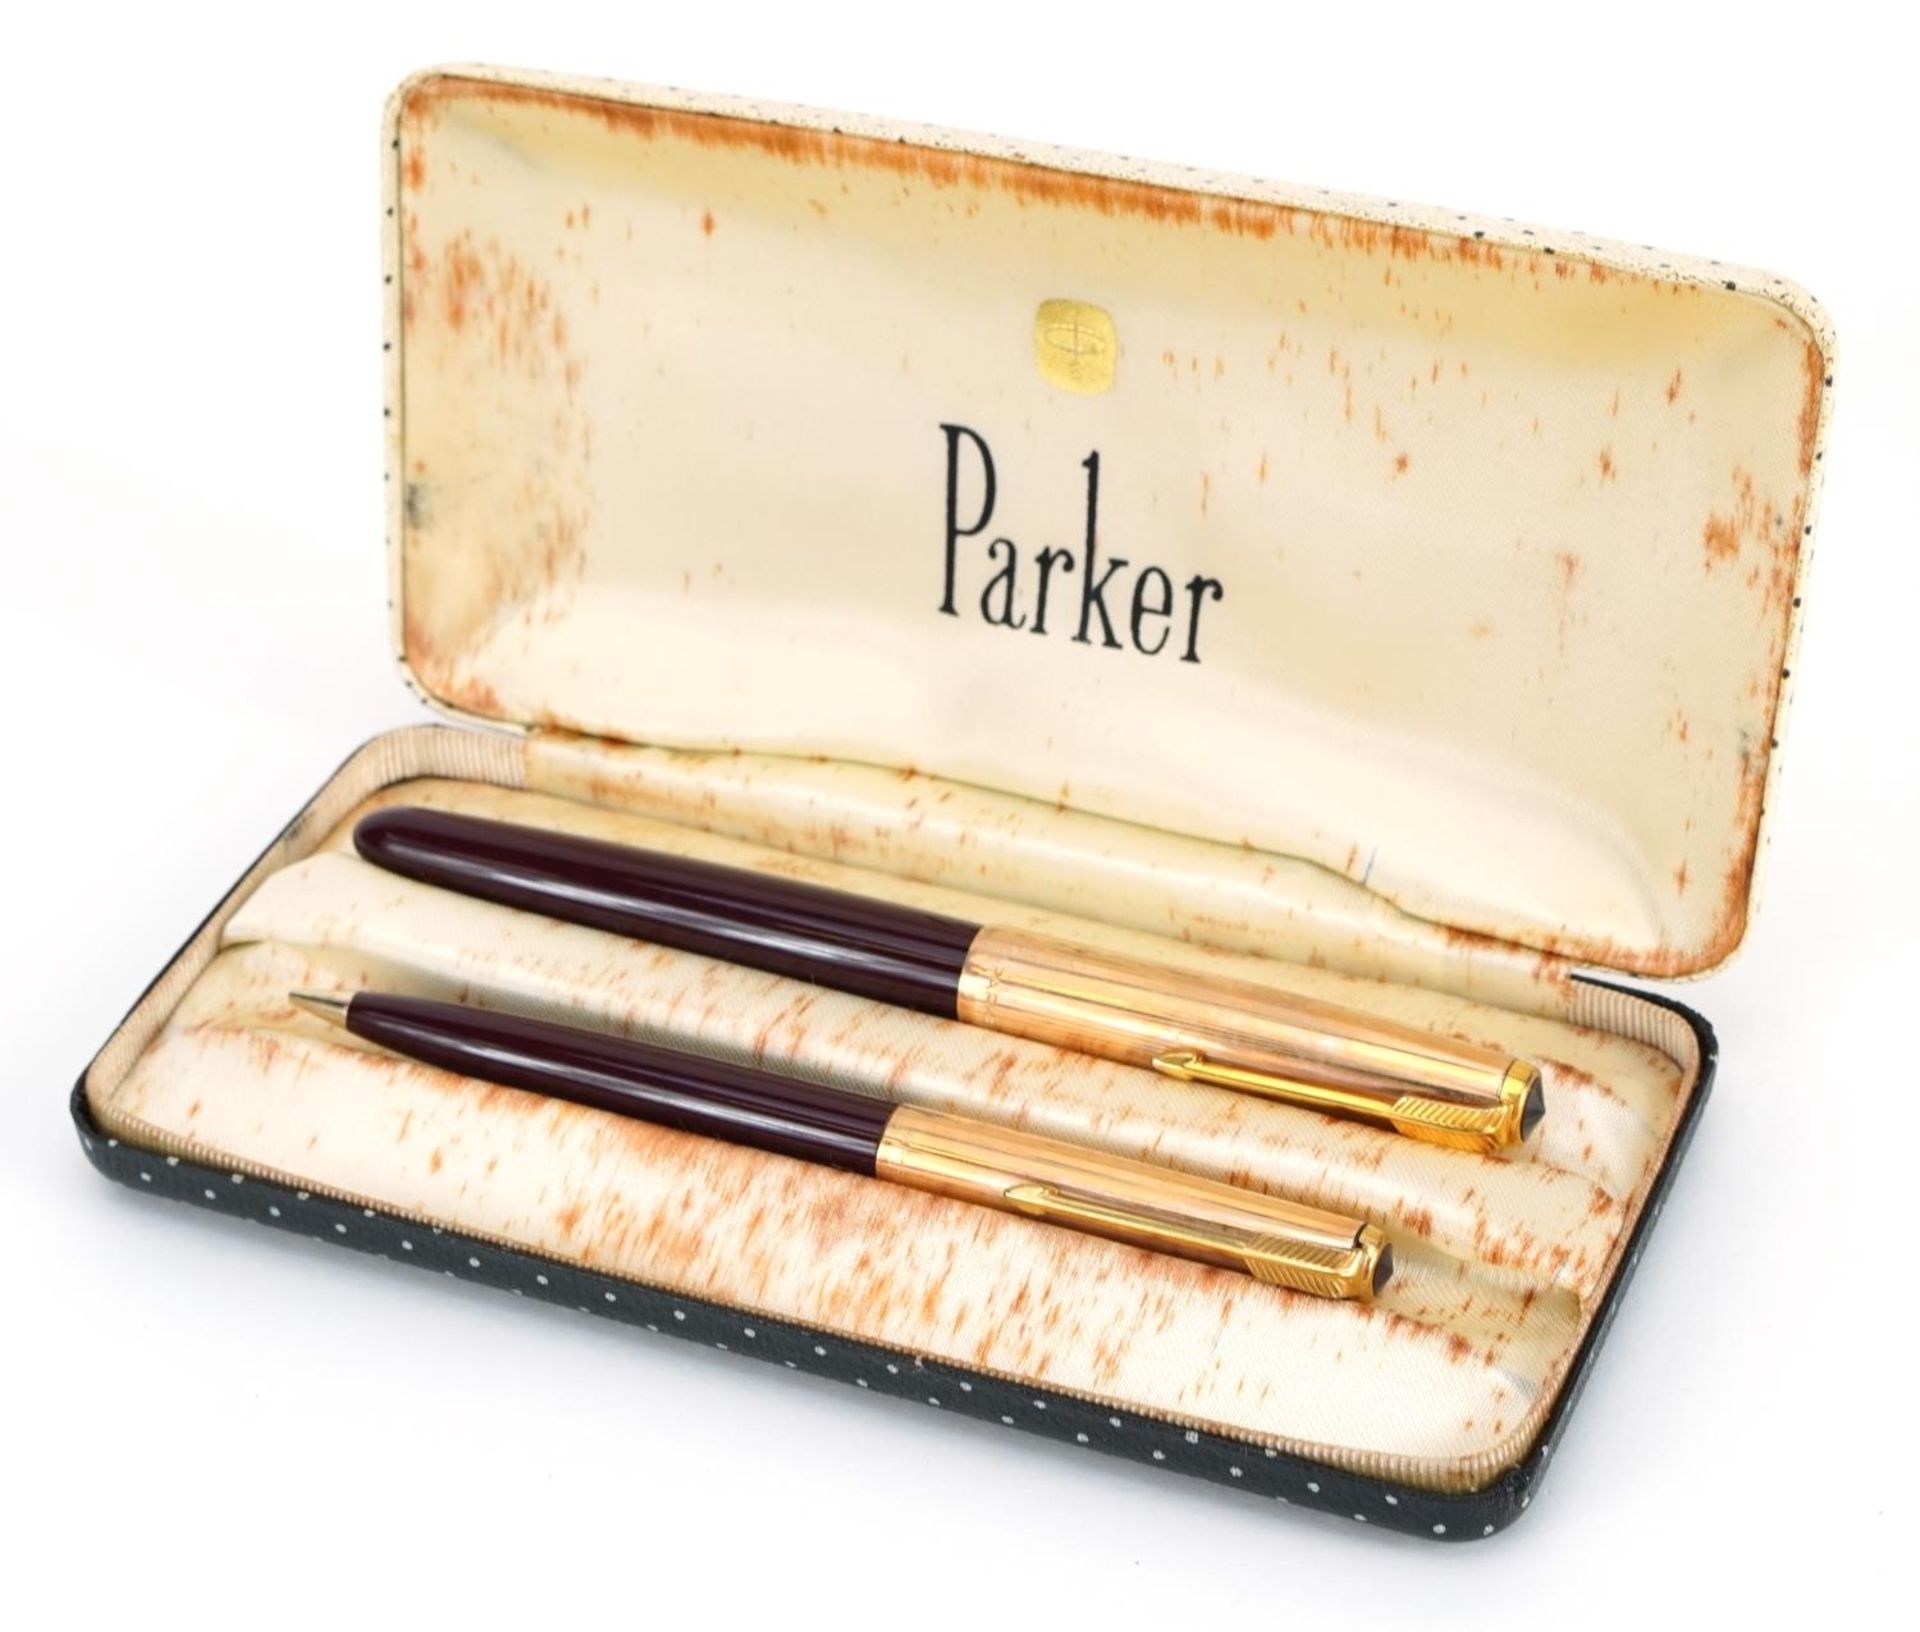 Parker 51 fountain pen and propelling pencil set with fitted case - Image 5 of 6